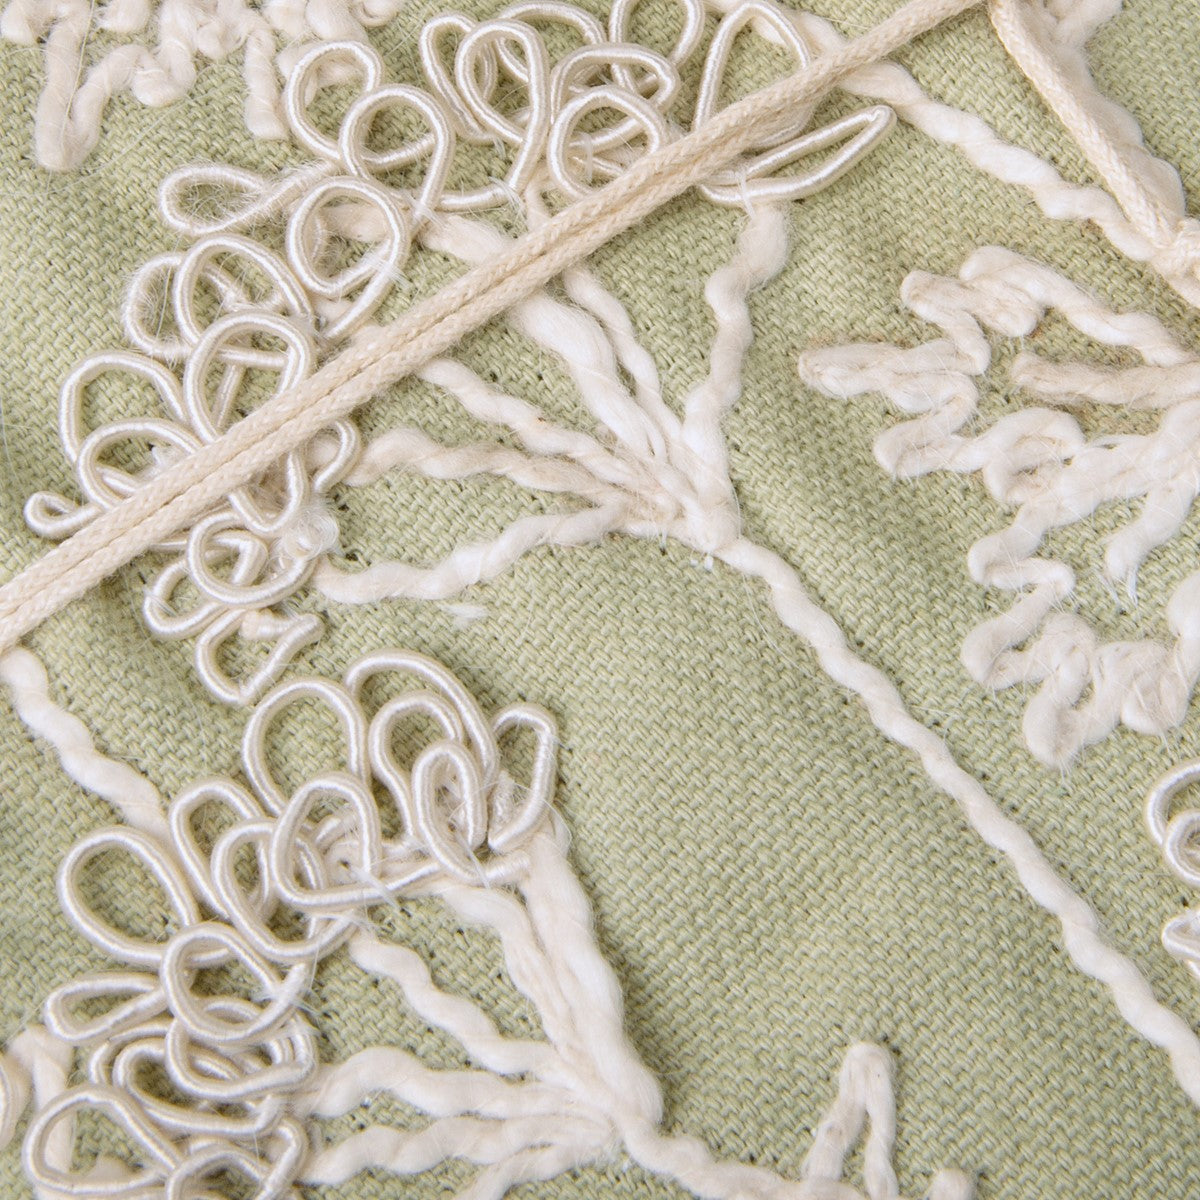 Queen Anne;s Lace - Journal